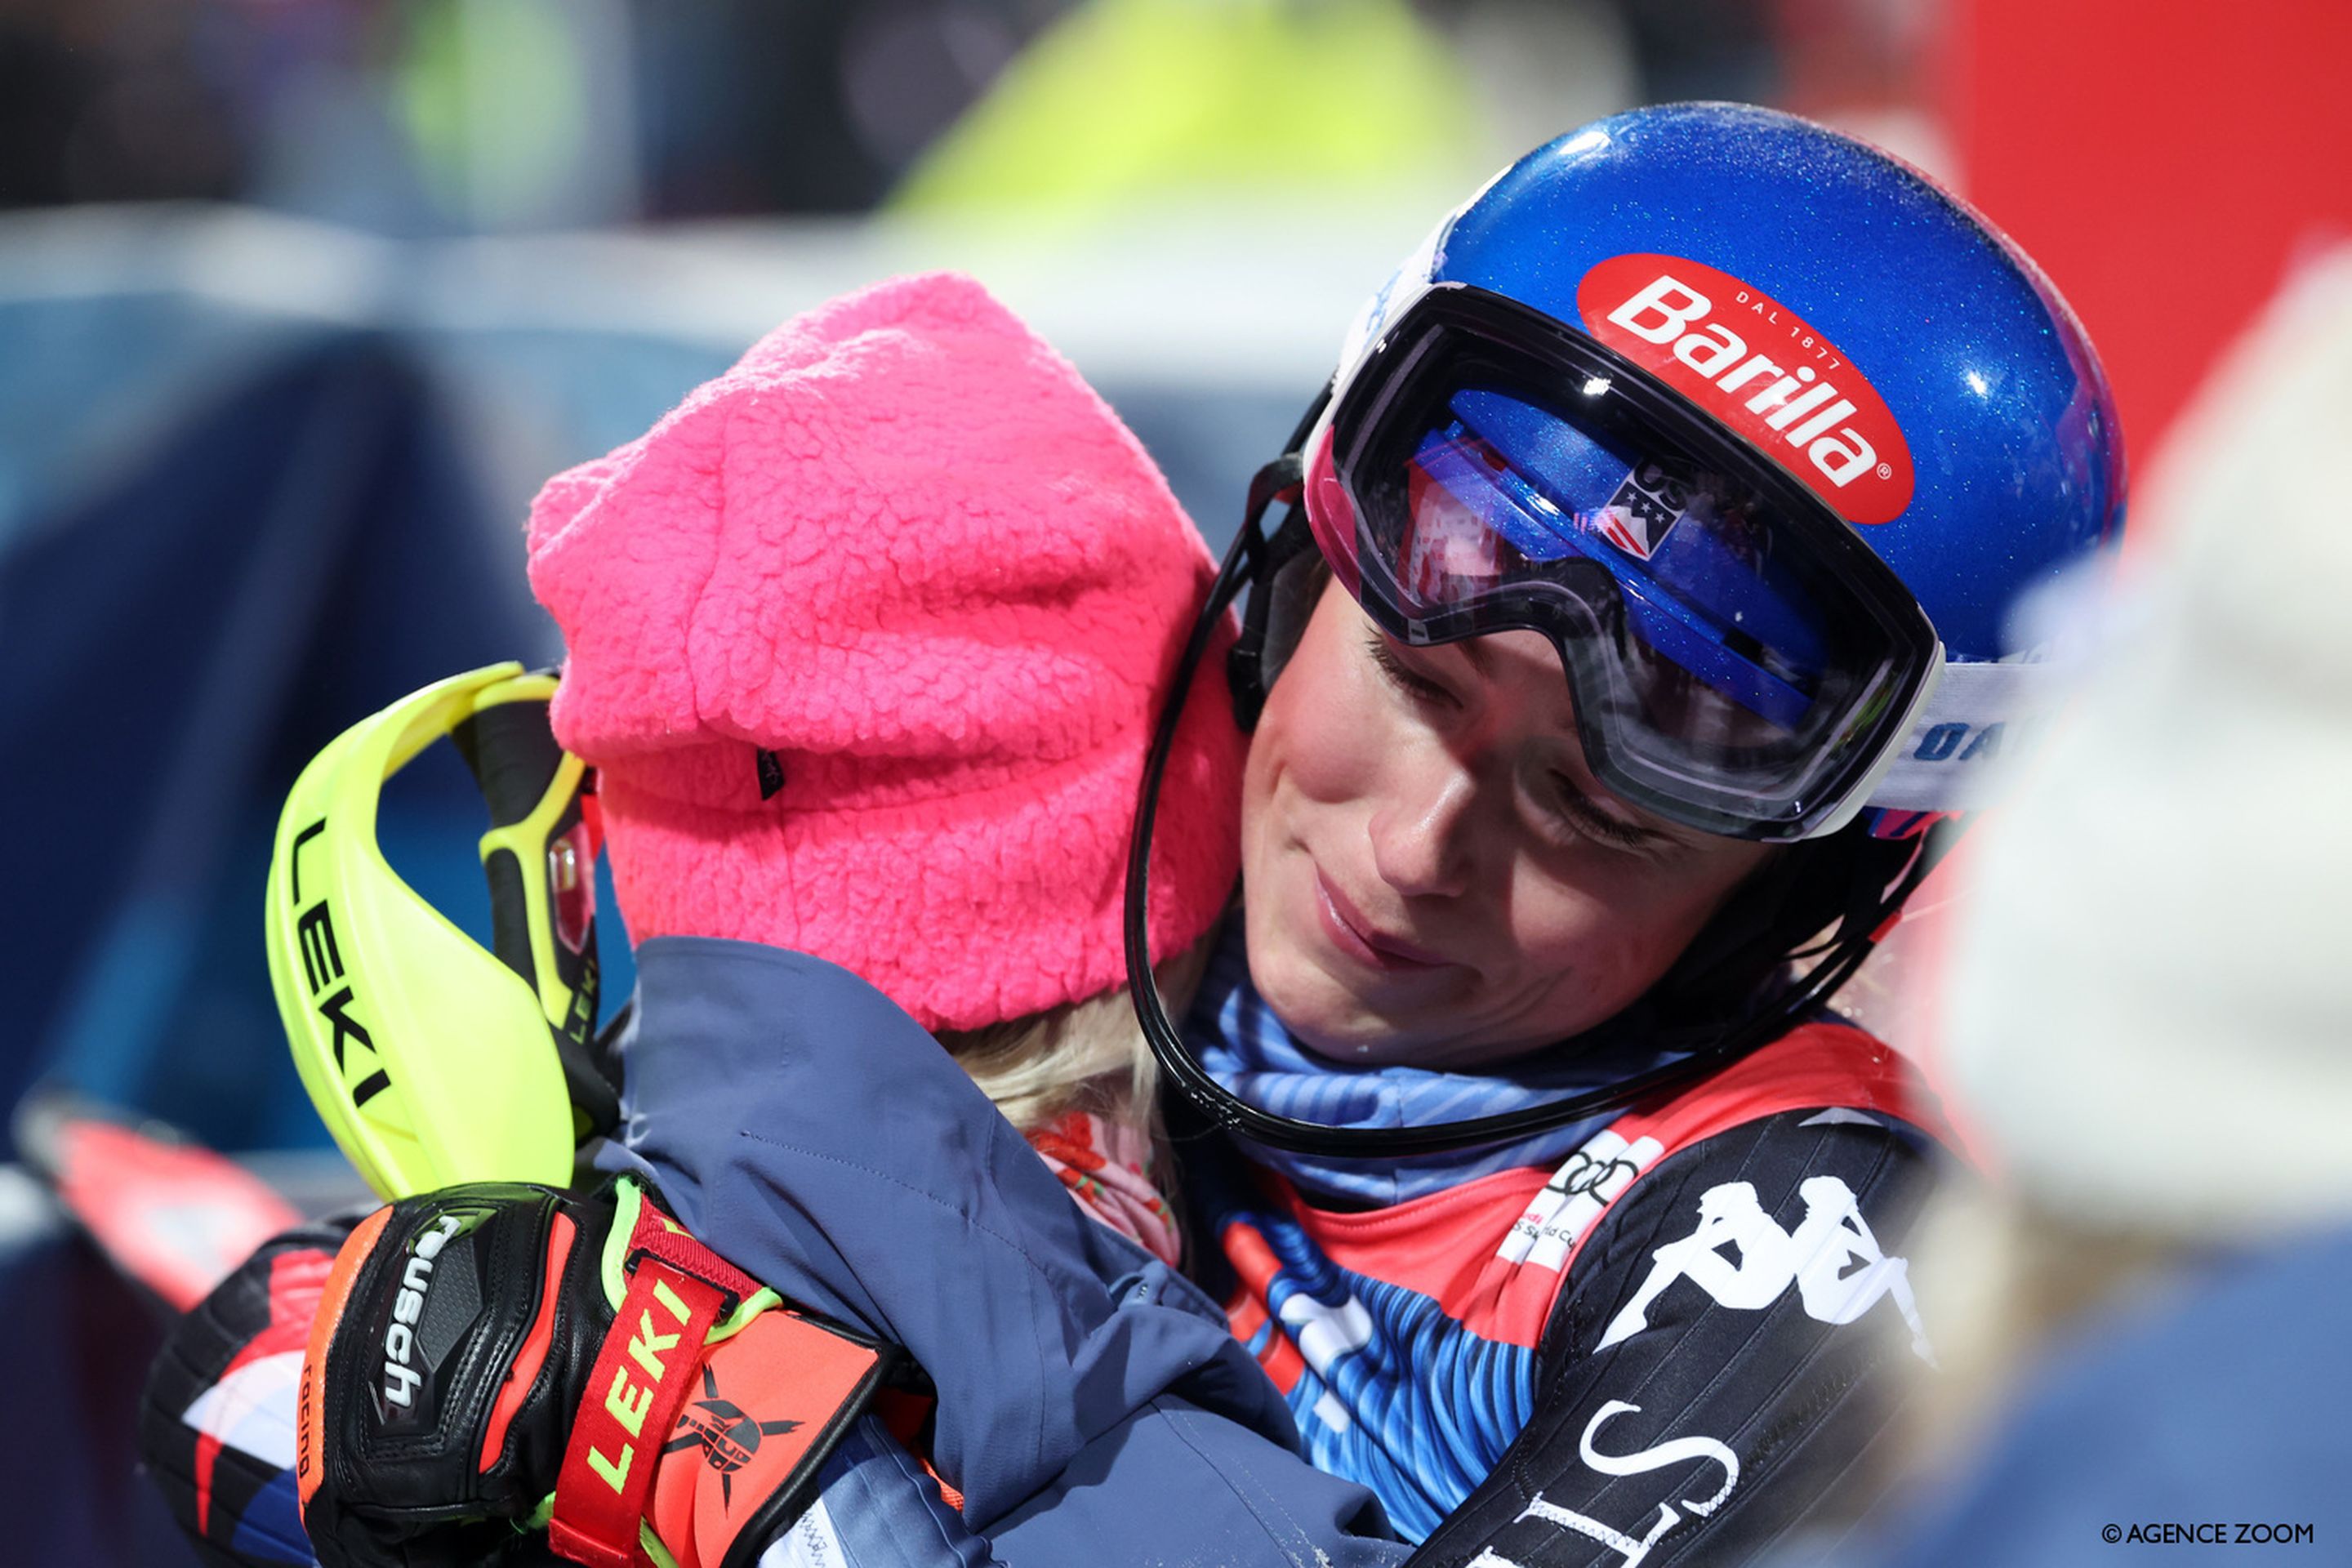 An emotional Mikaela Shiffrin (USA) in the finish area after Tuesday's race (Agence Zoom)